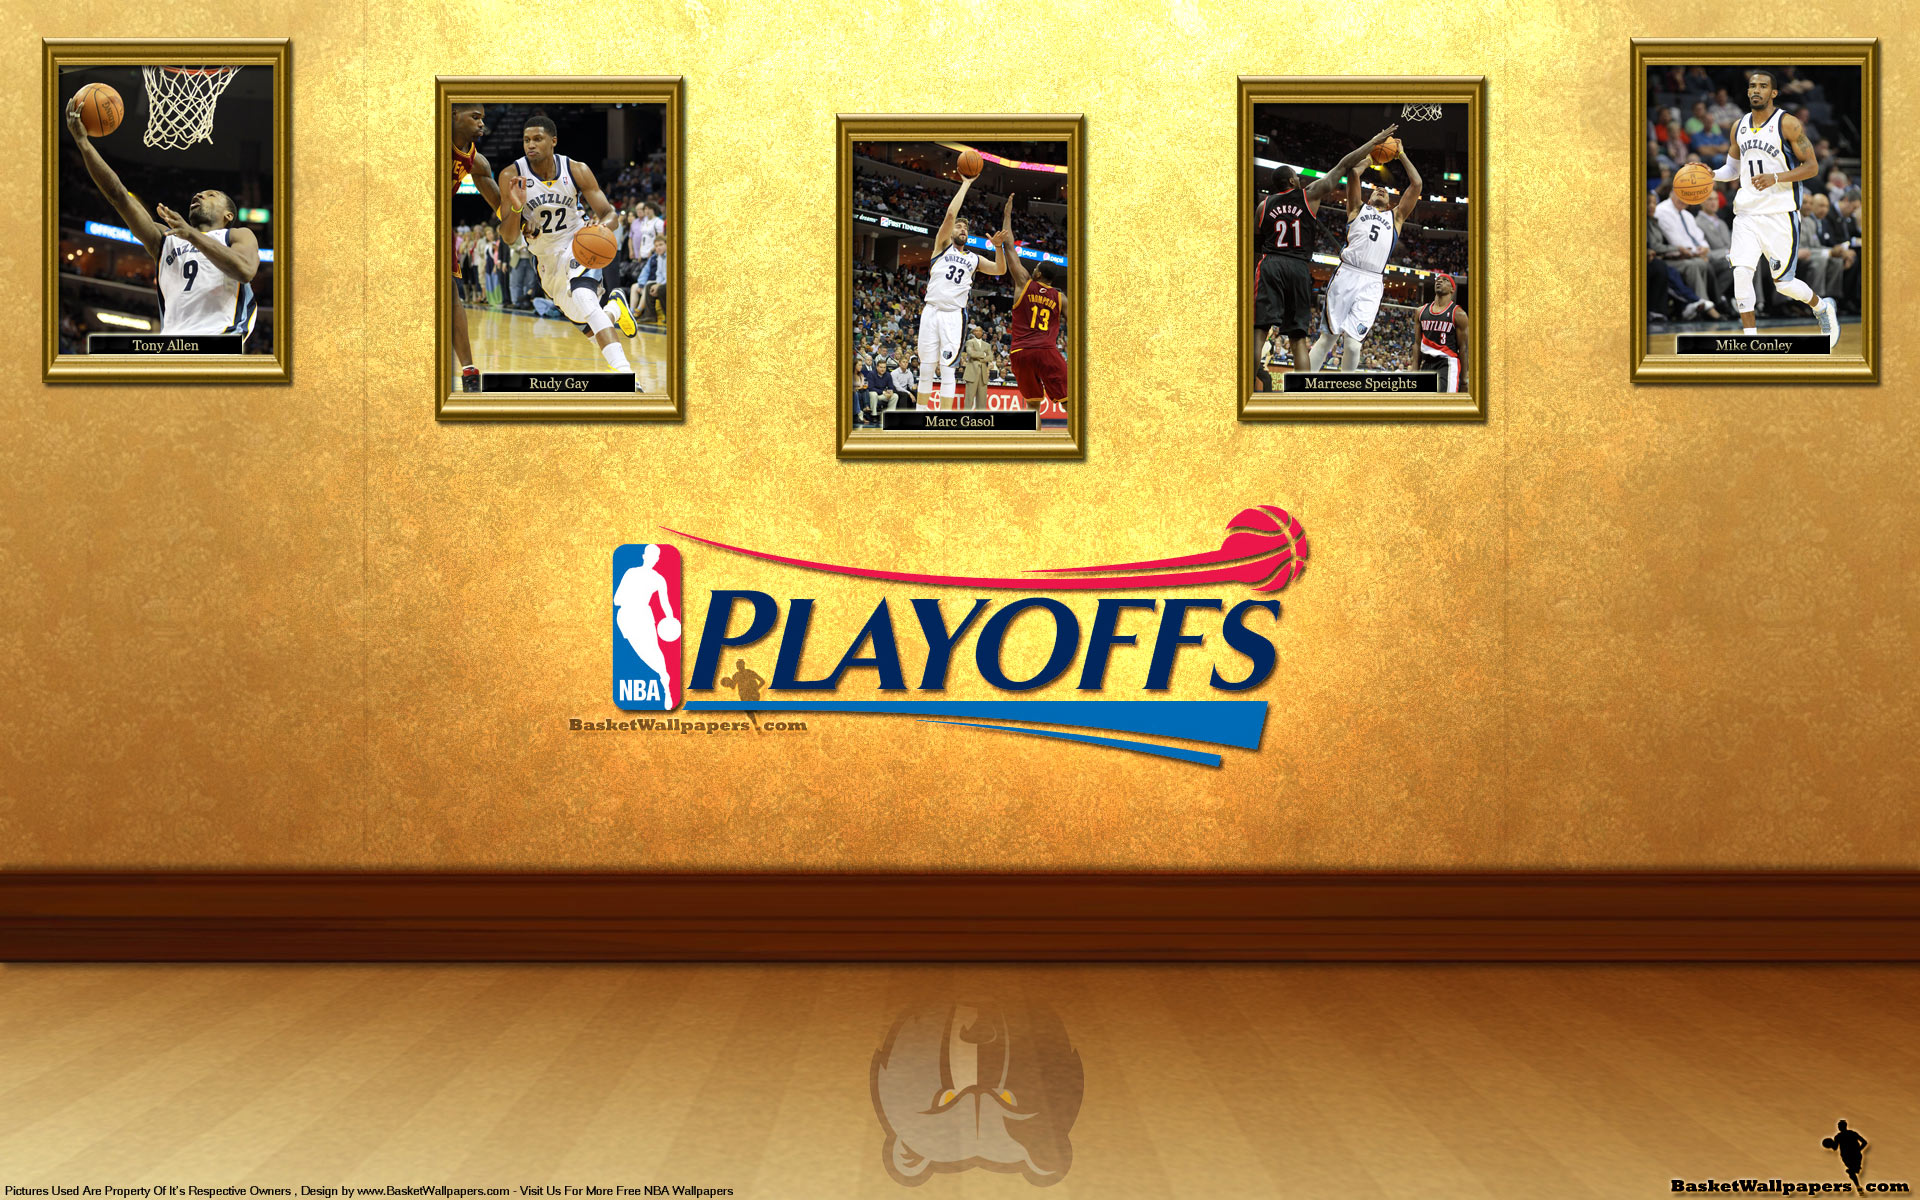 Memphis Grizzlies See You In Playoffs 2012 Wallpaper1920 x 1200